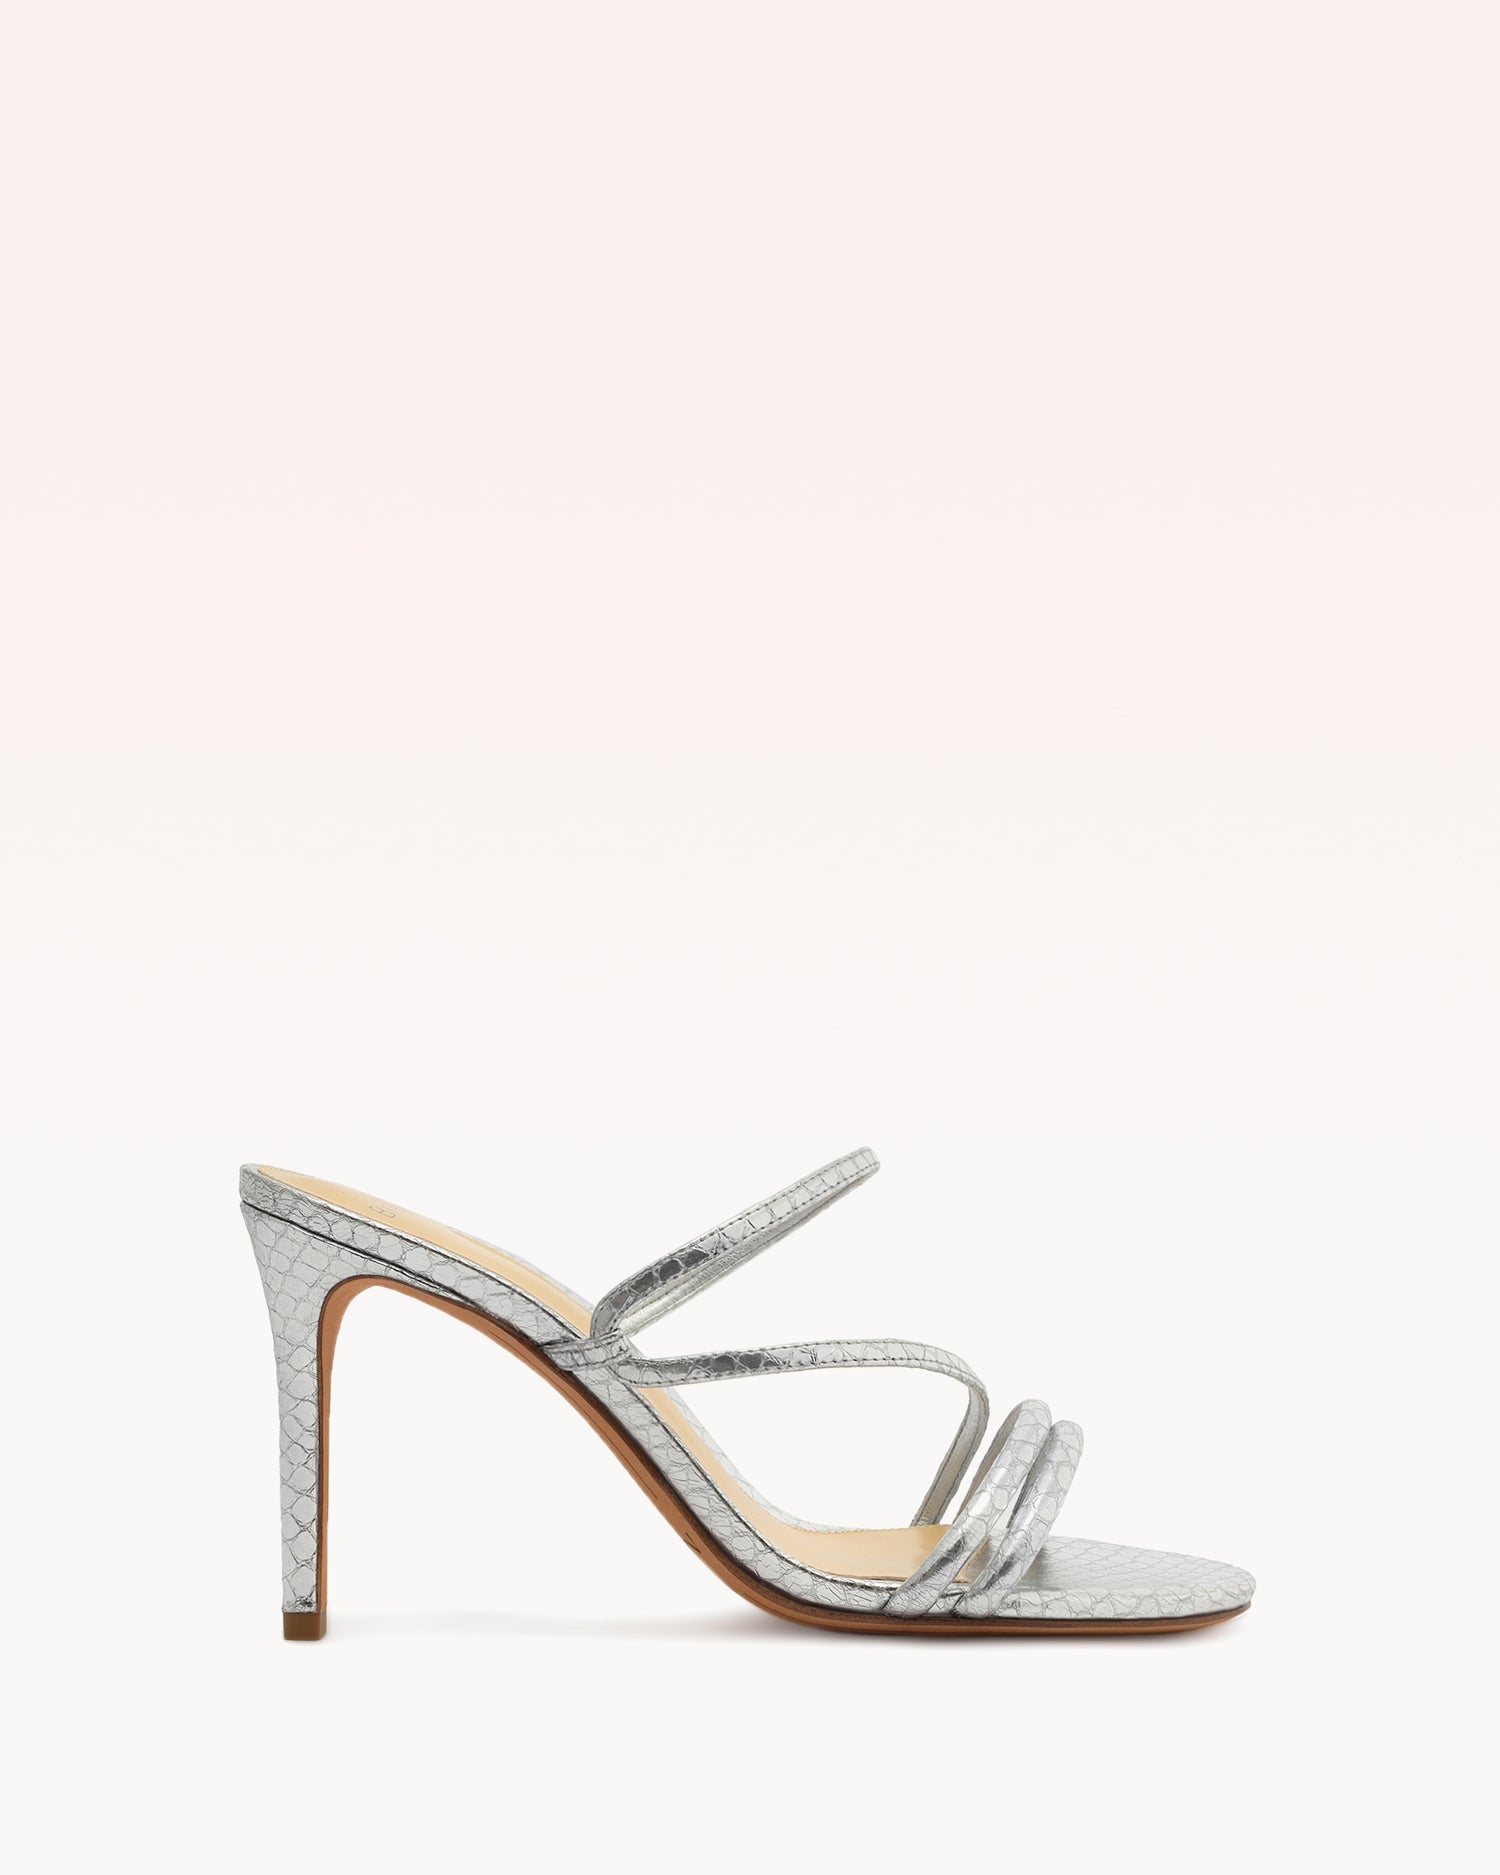 Eve 85 Silver Sandals PRE FALL 23 35 Silver Snake Embossed